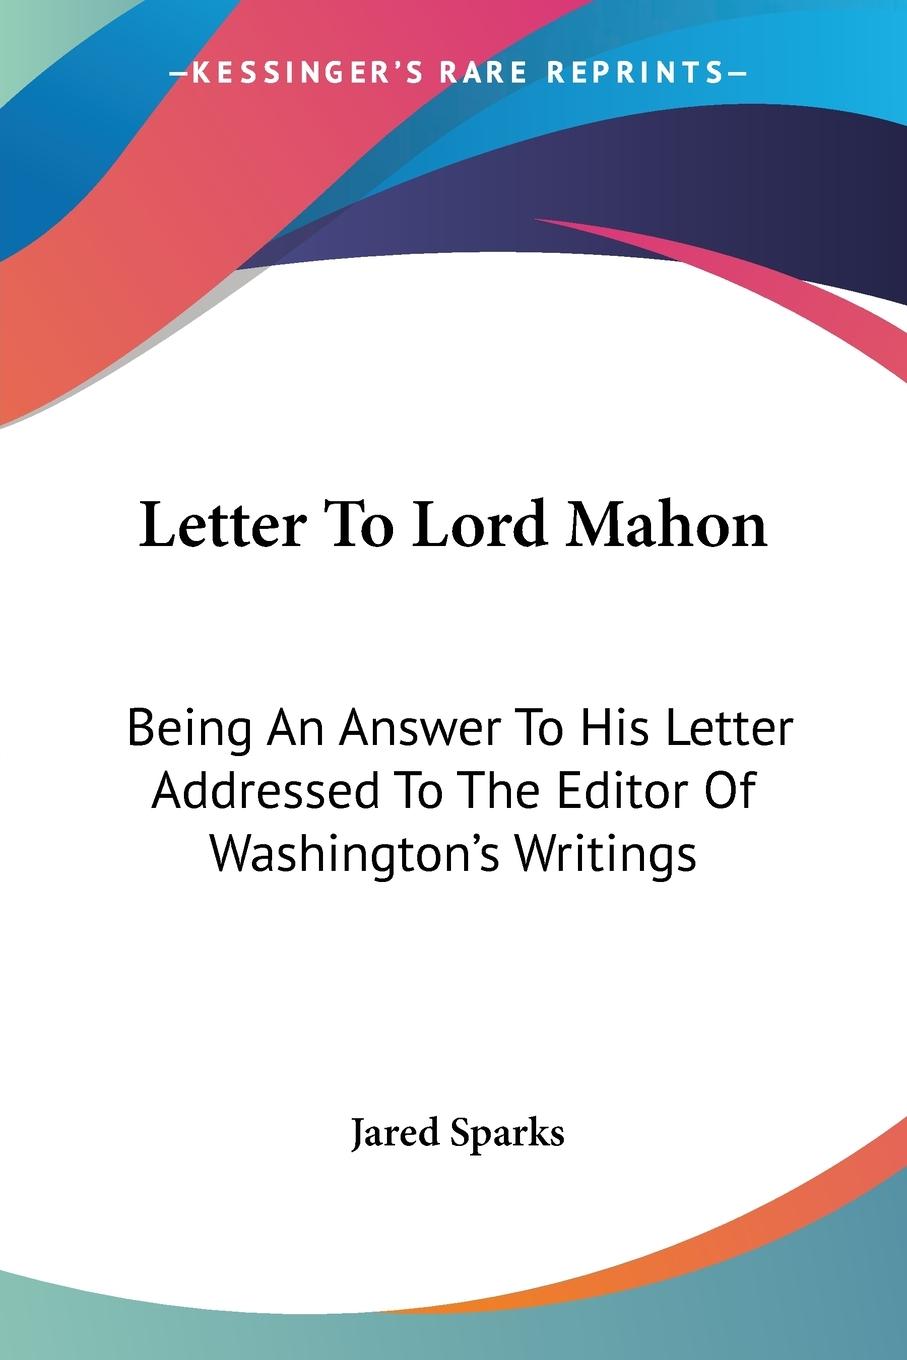 Letter To Lord Mahon - Sparks, Jared